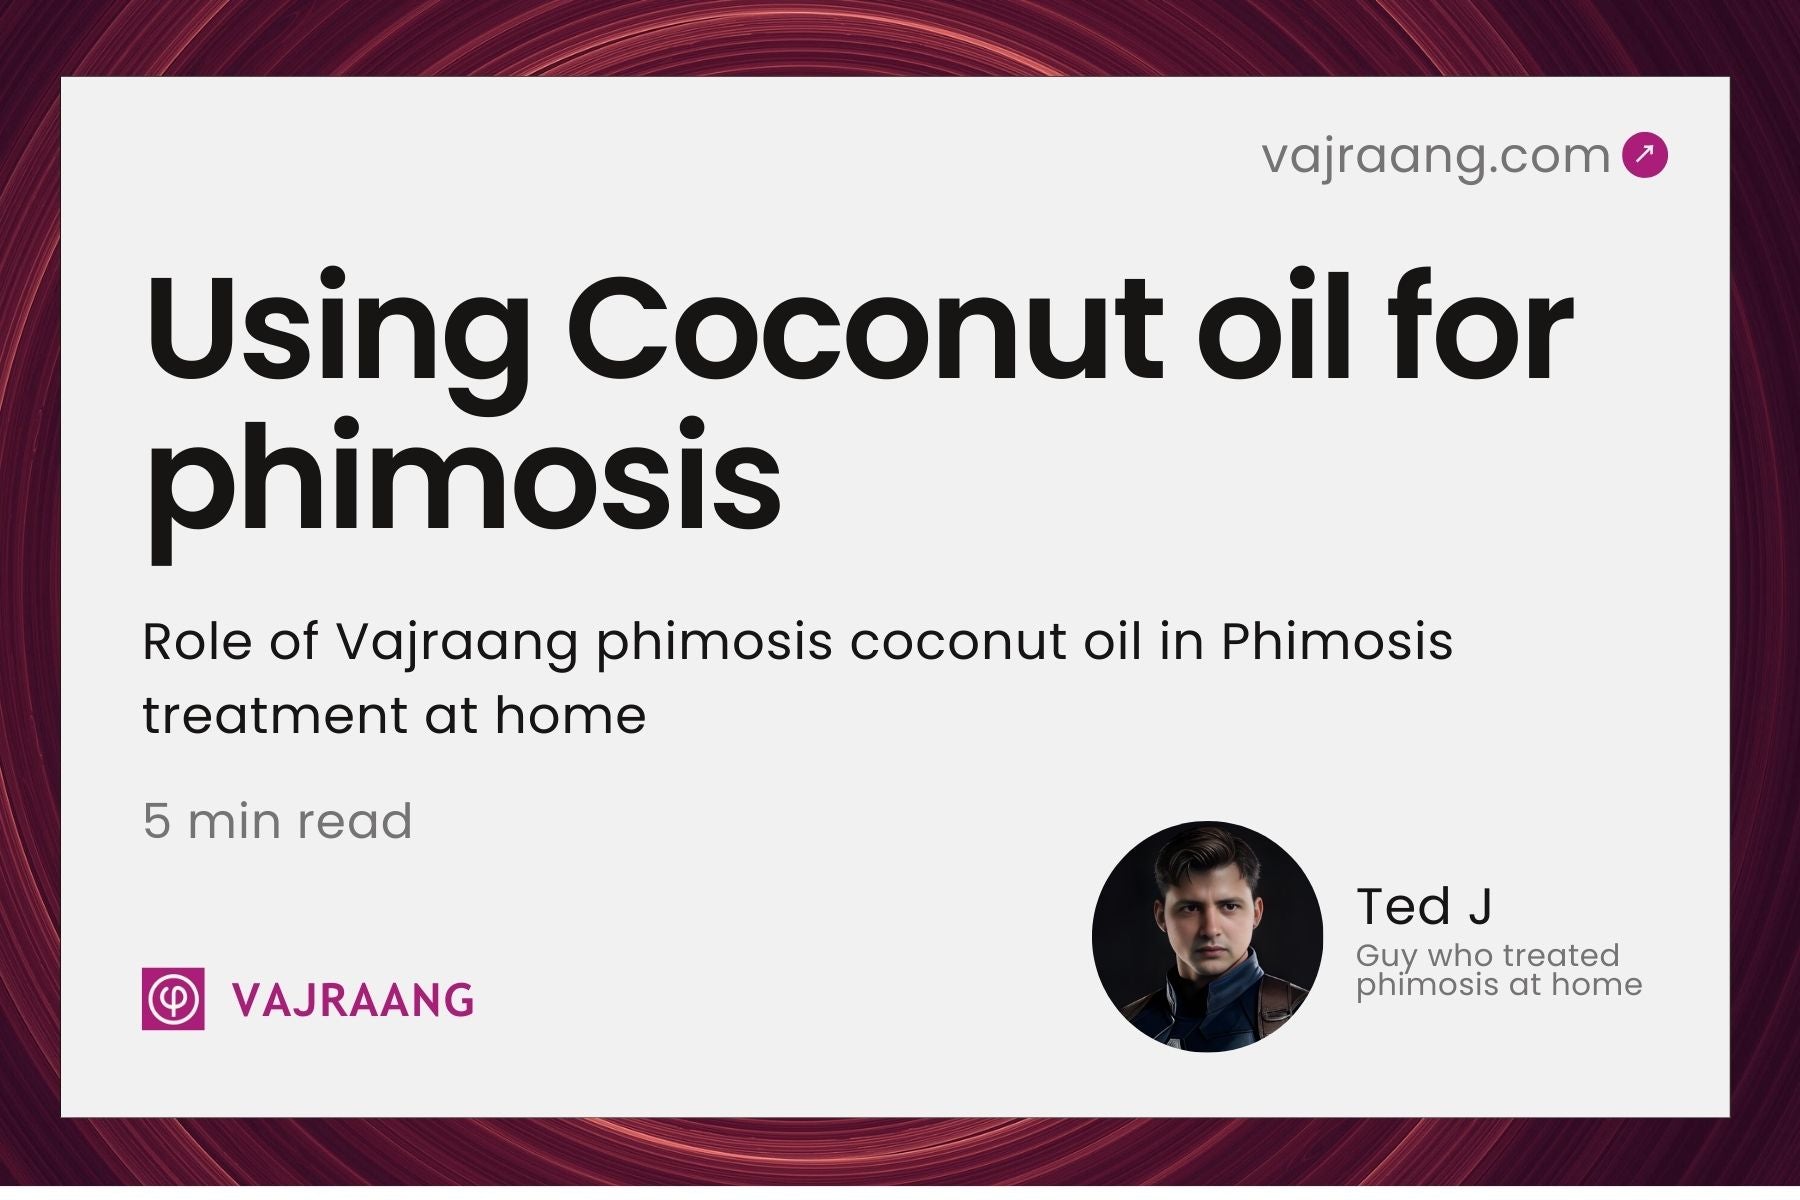 Role of Vajraang phimosis coconut oil in Phimosis treatment at